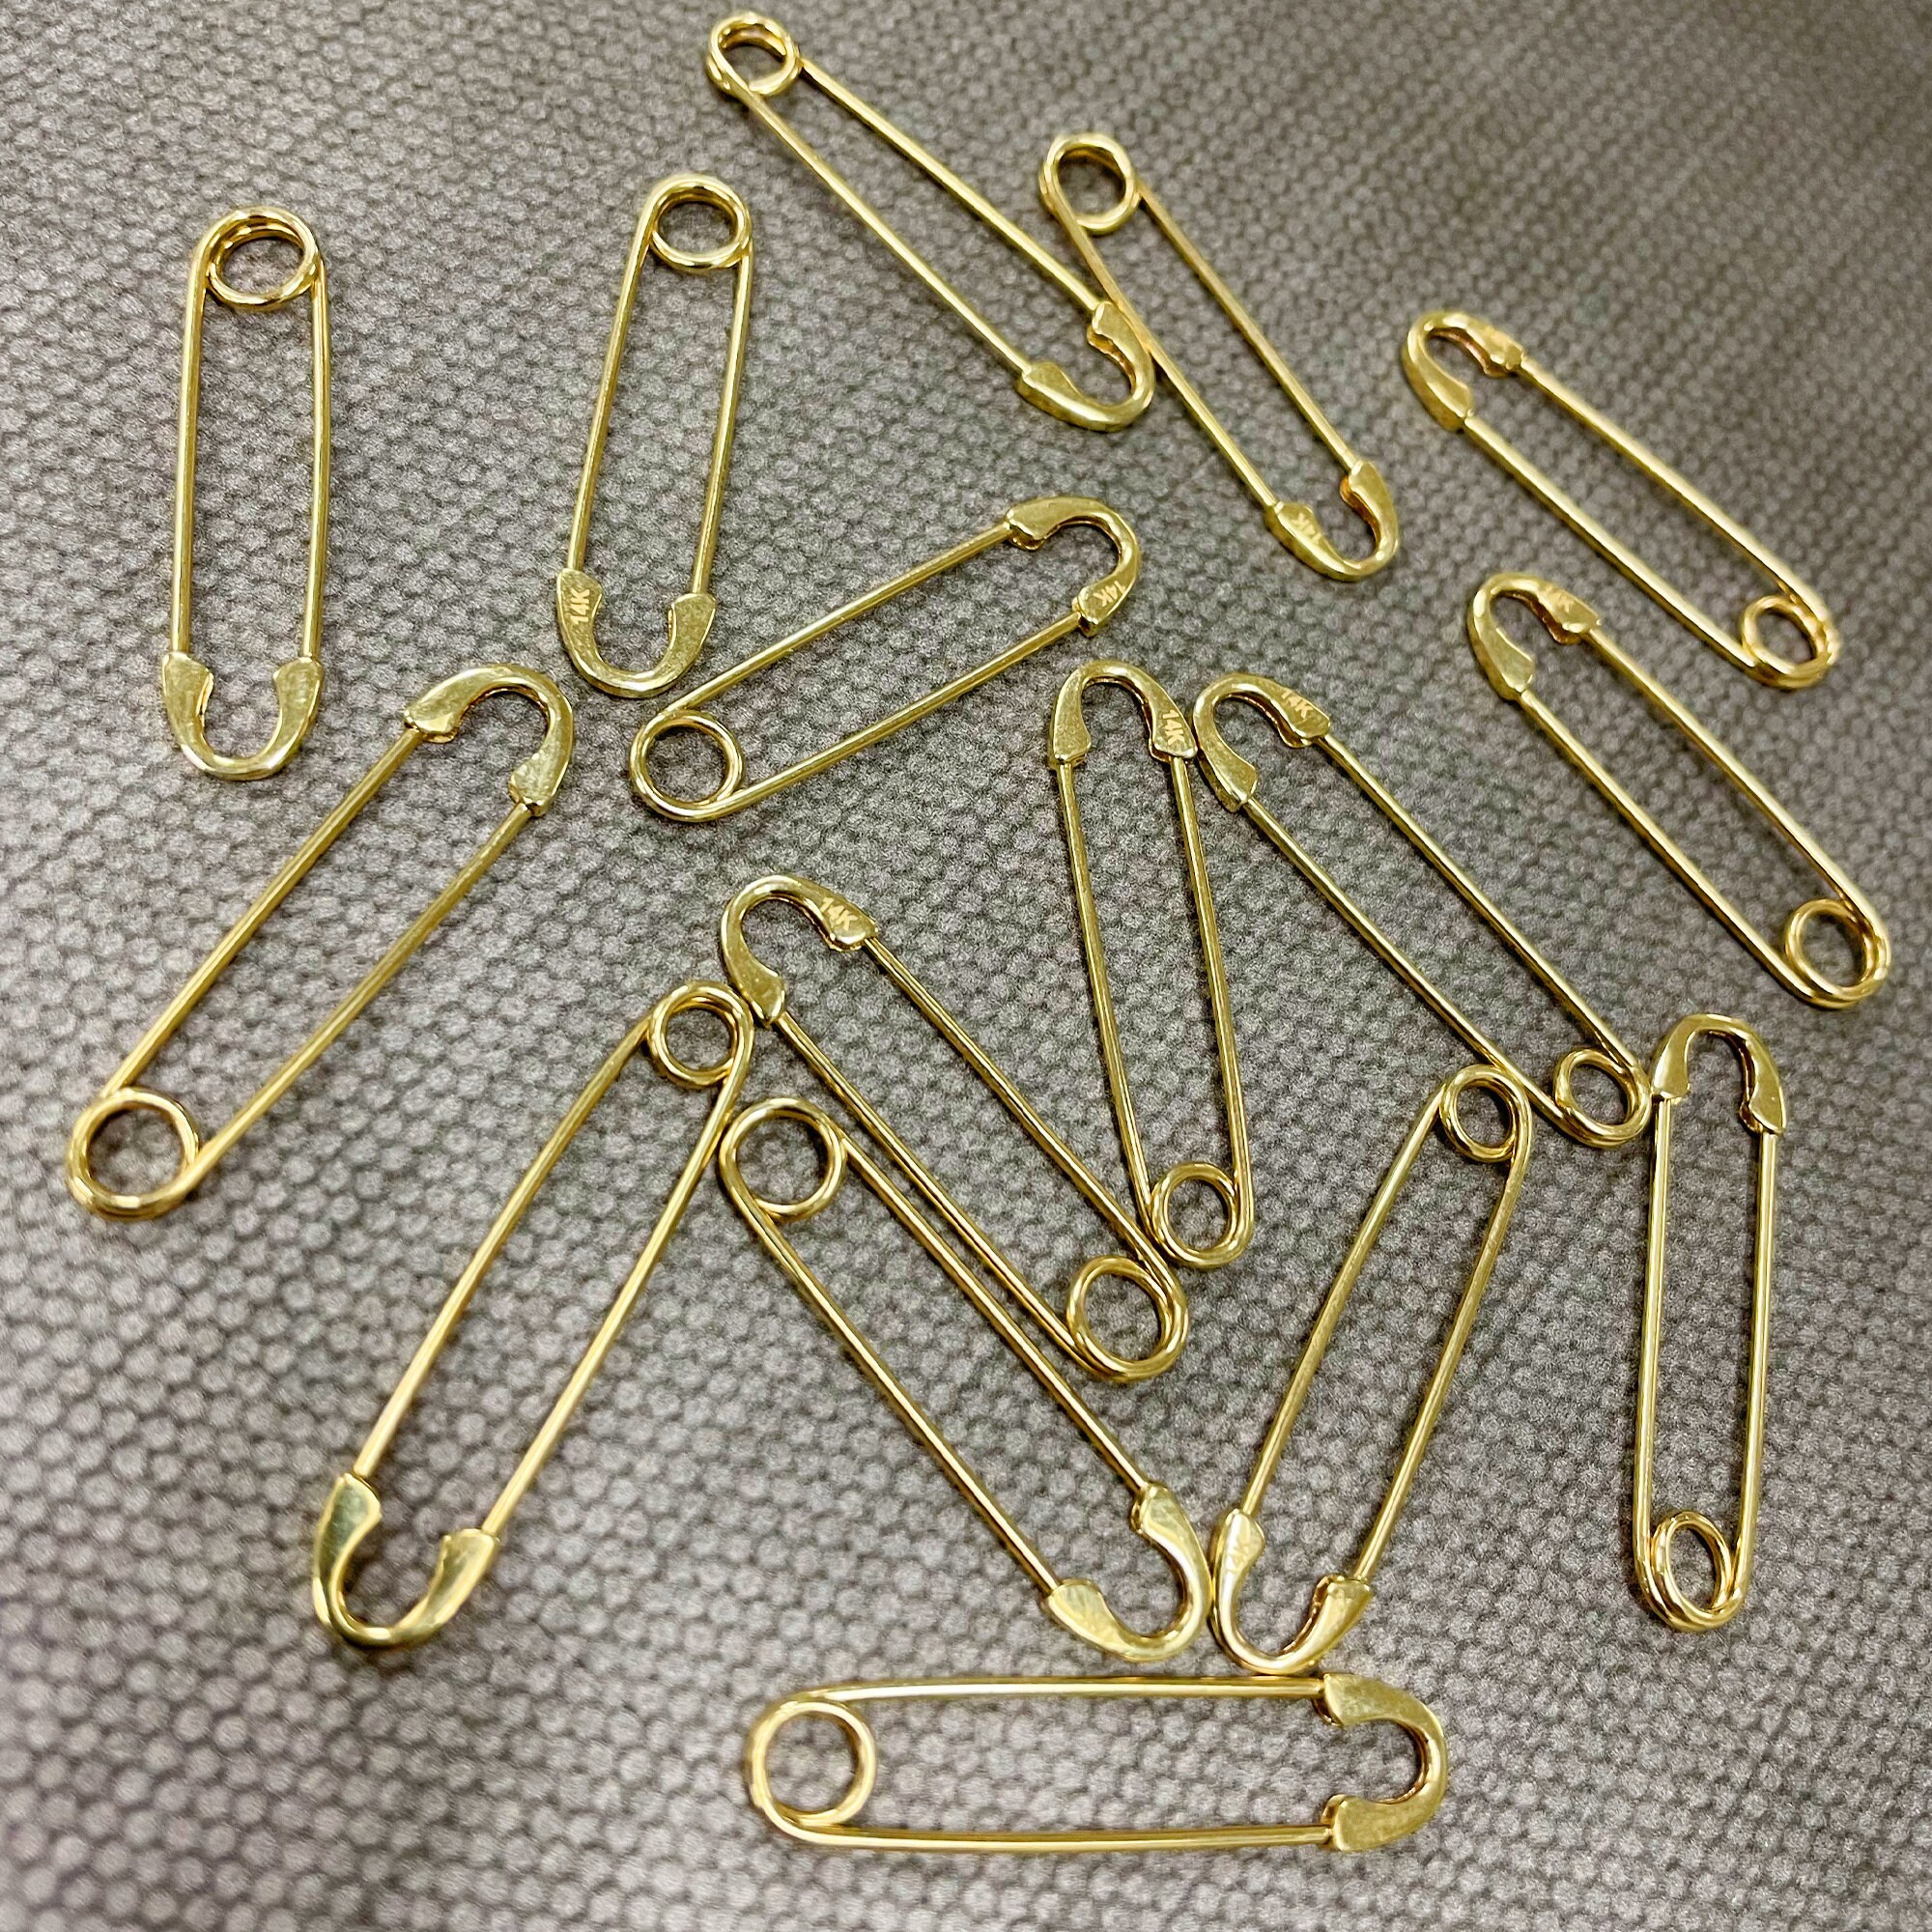 Gold Safety Pins Size 2 - 1.5 Inch 144 Pieces Premium Quality